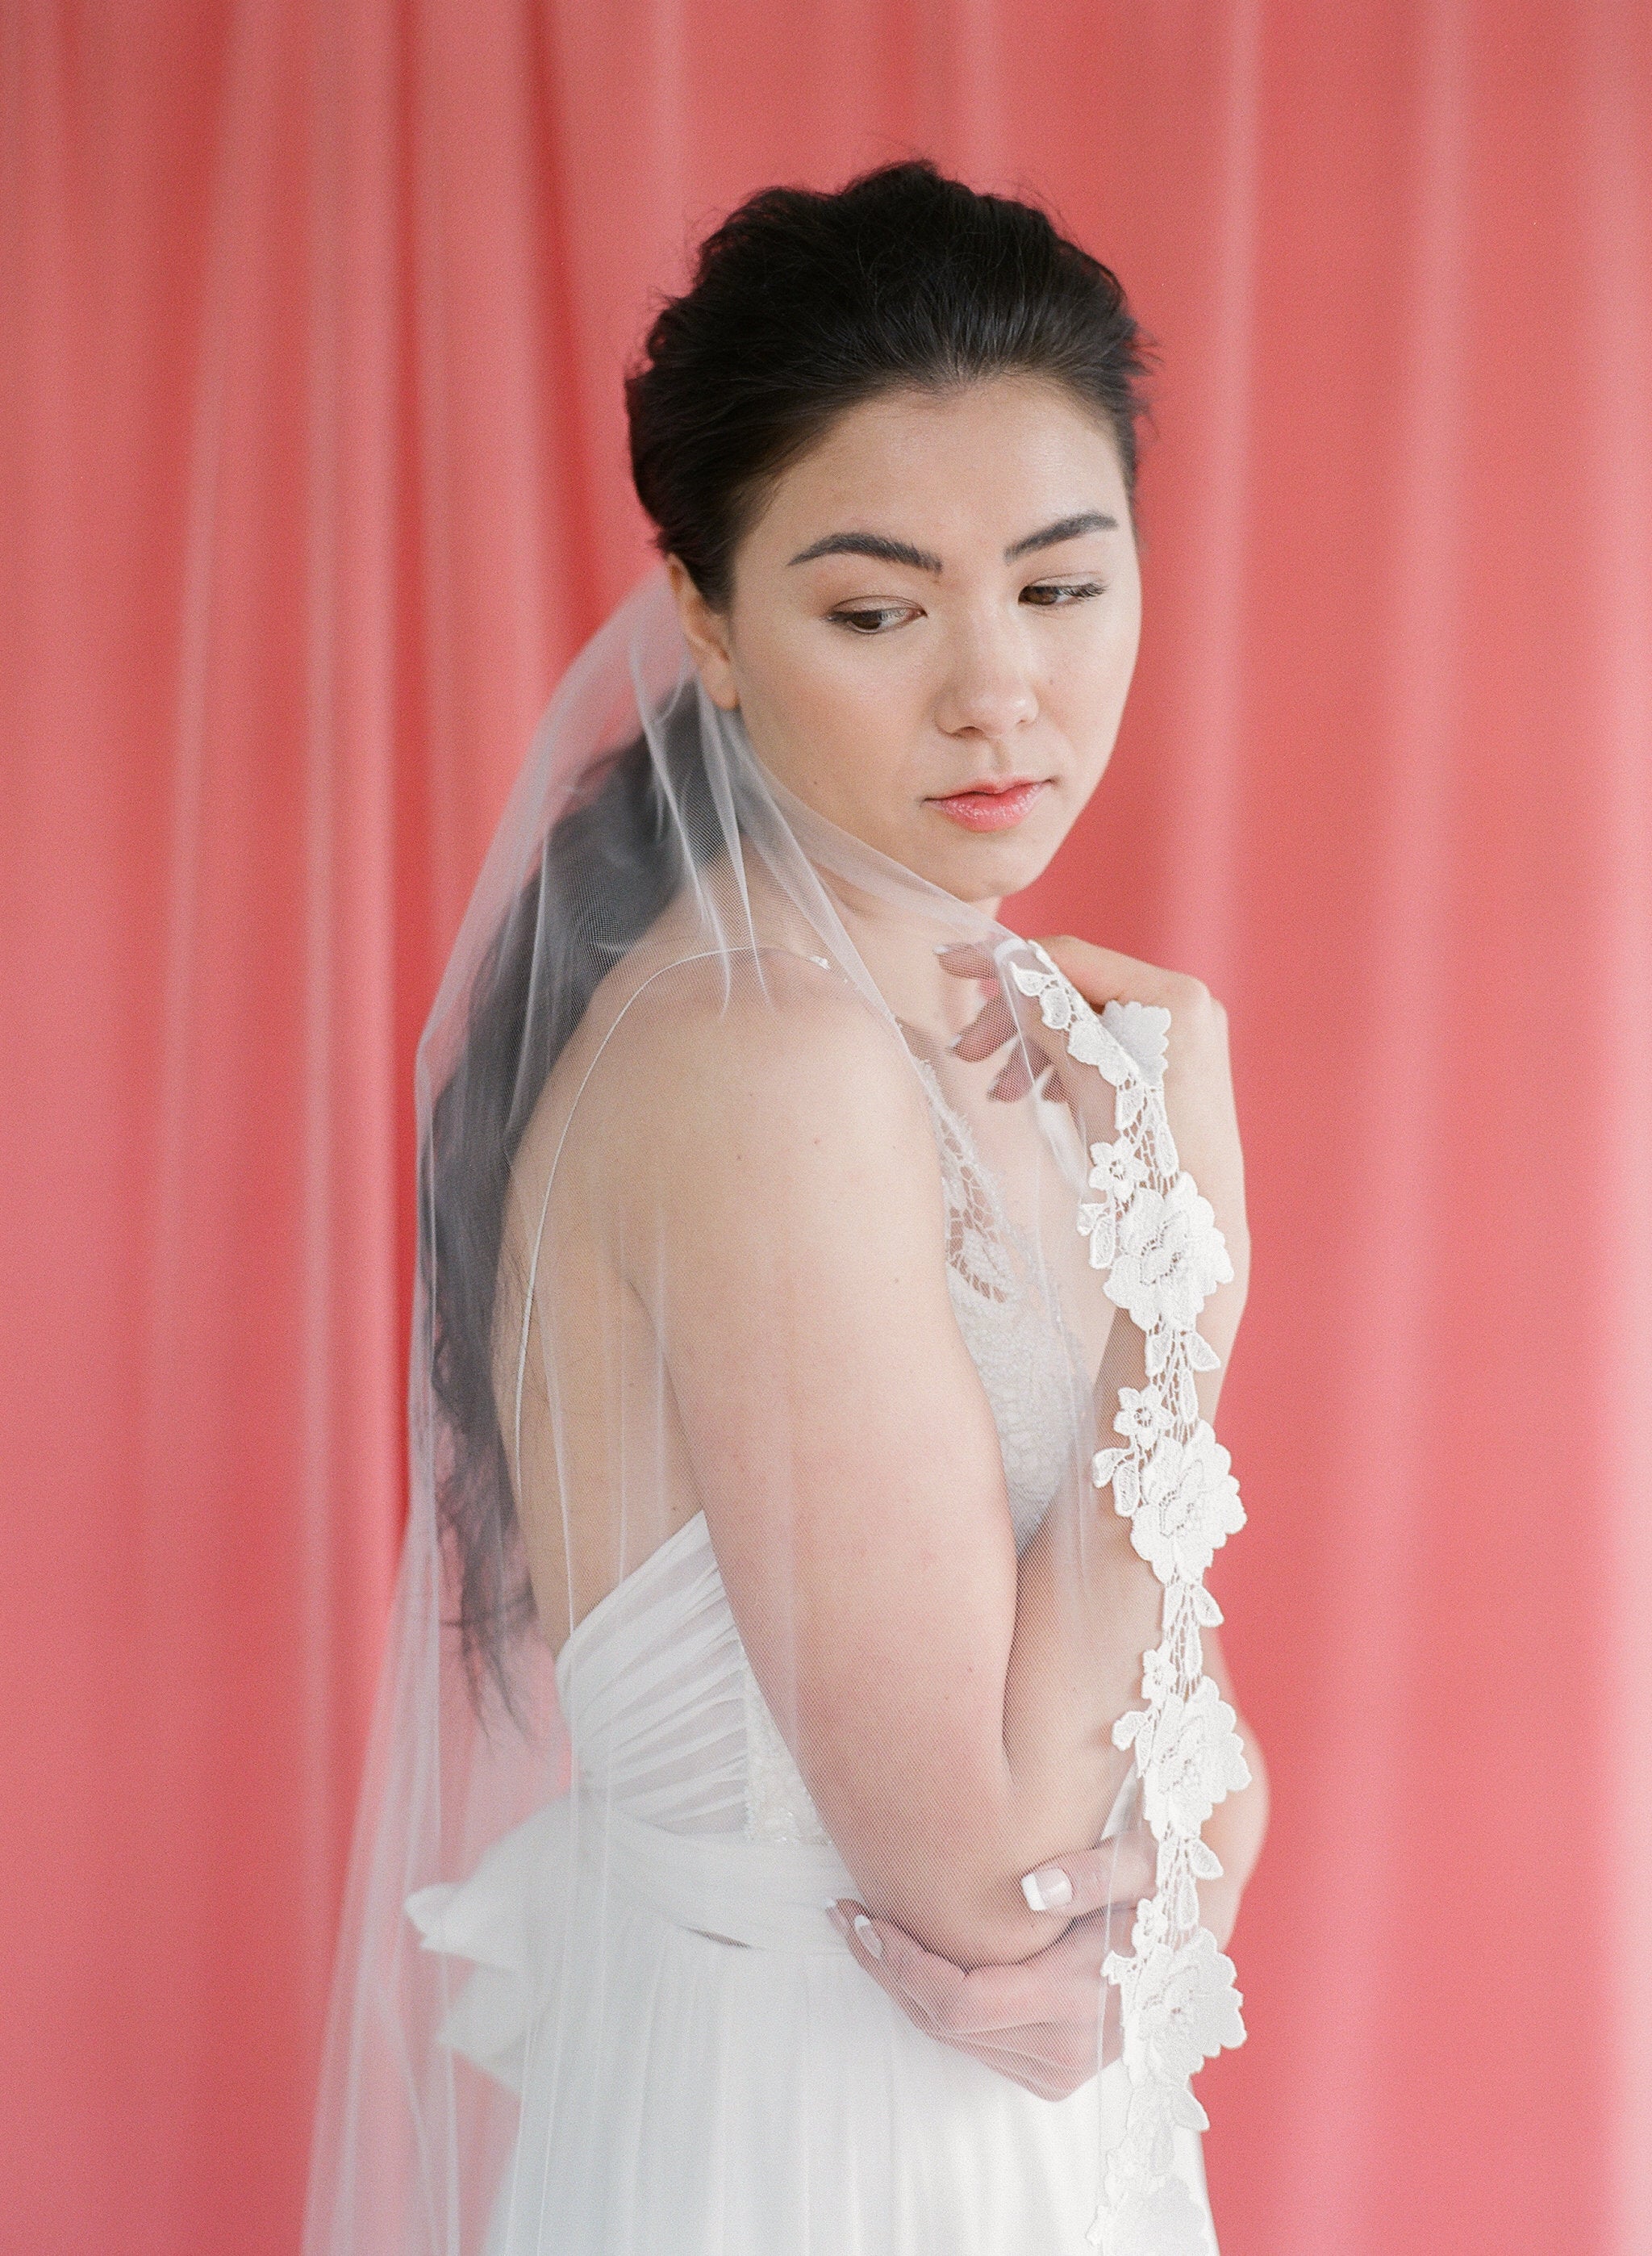 Classic tulle veil with a floral lace trim